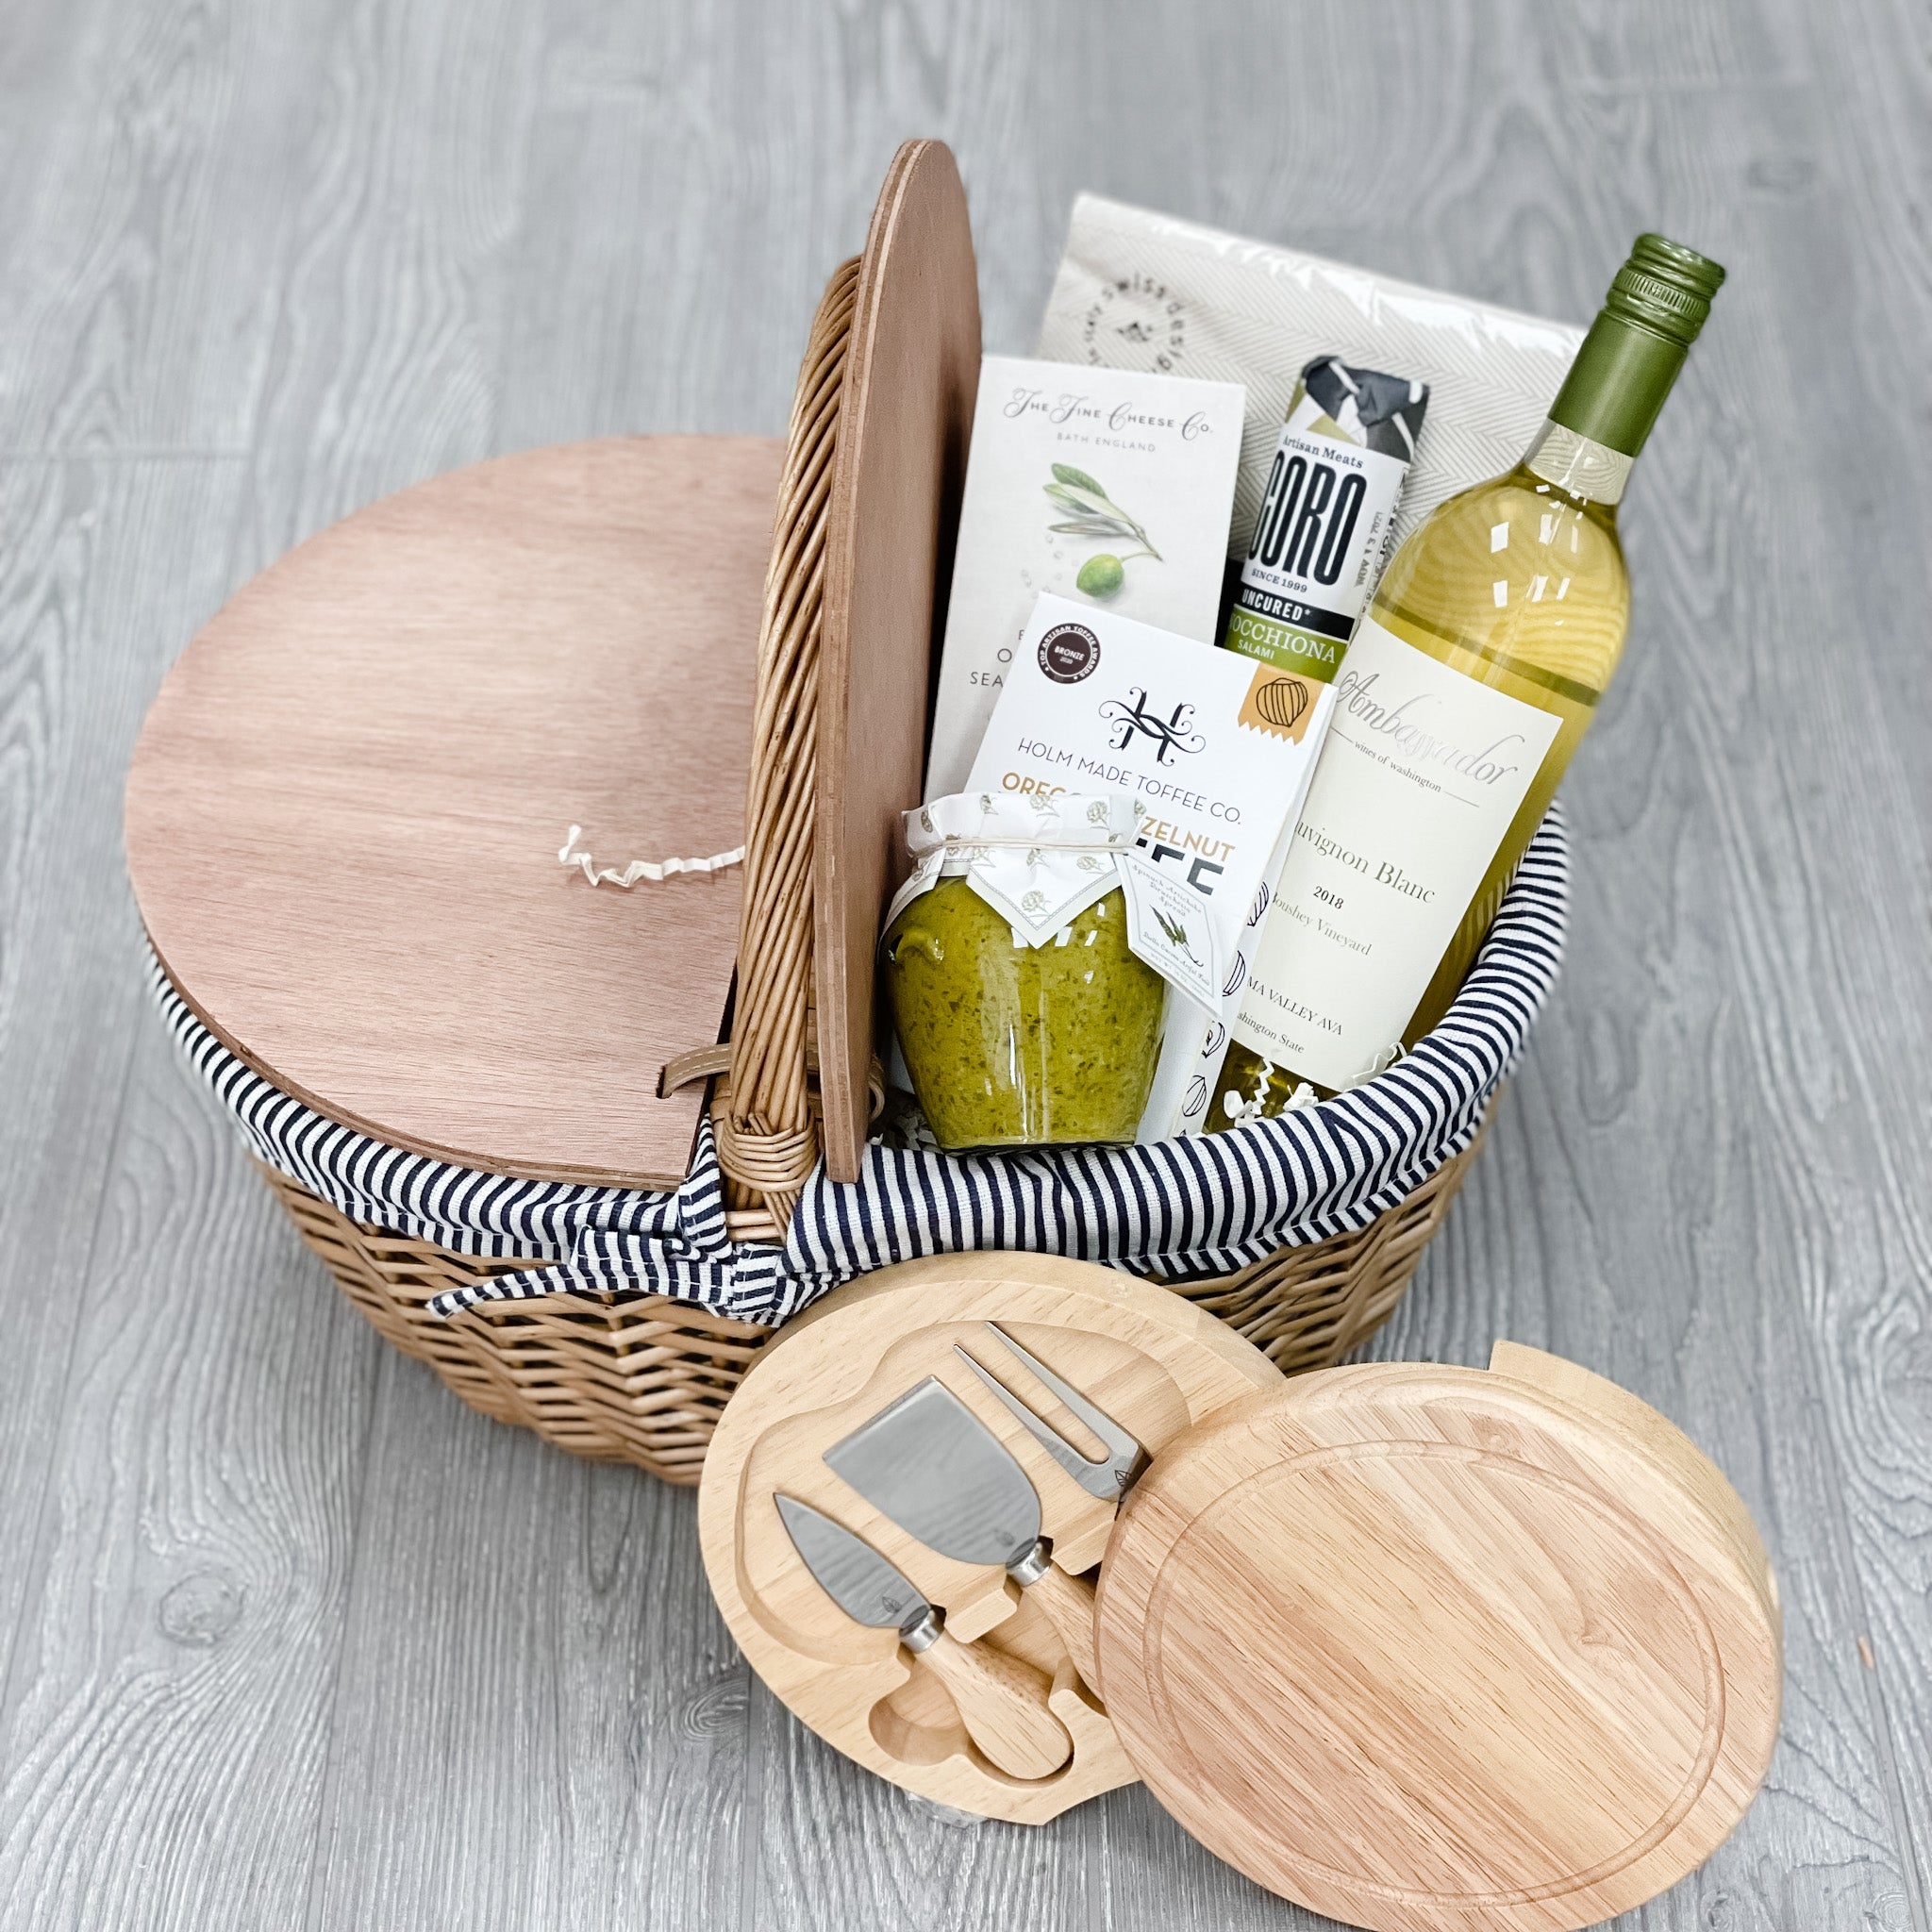 Picnic gift basket includes cheese knives, cheese board, artichoke dip, white wine, toffee, crackers, and napkins packaged in a picnic basket.